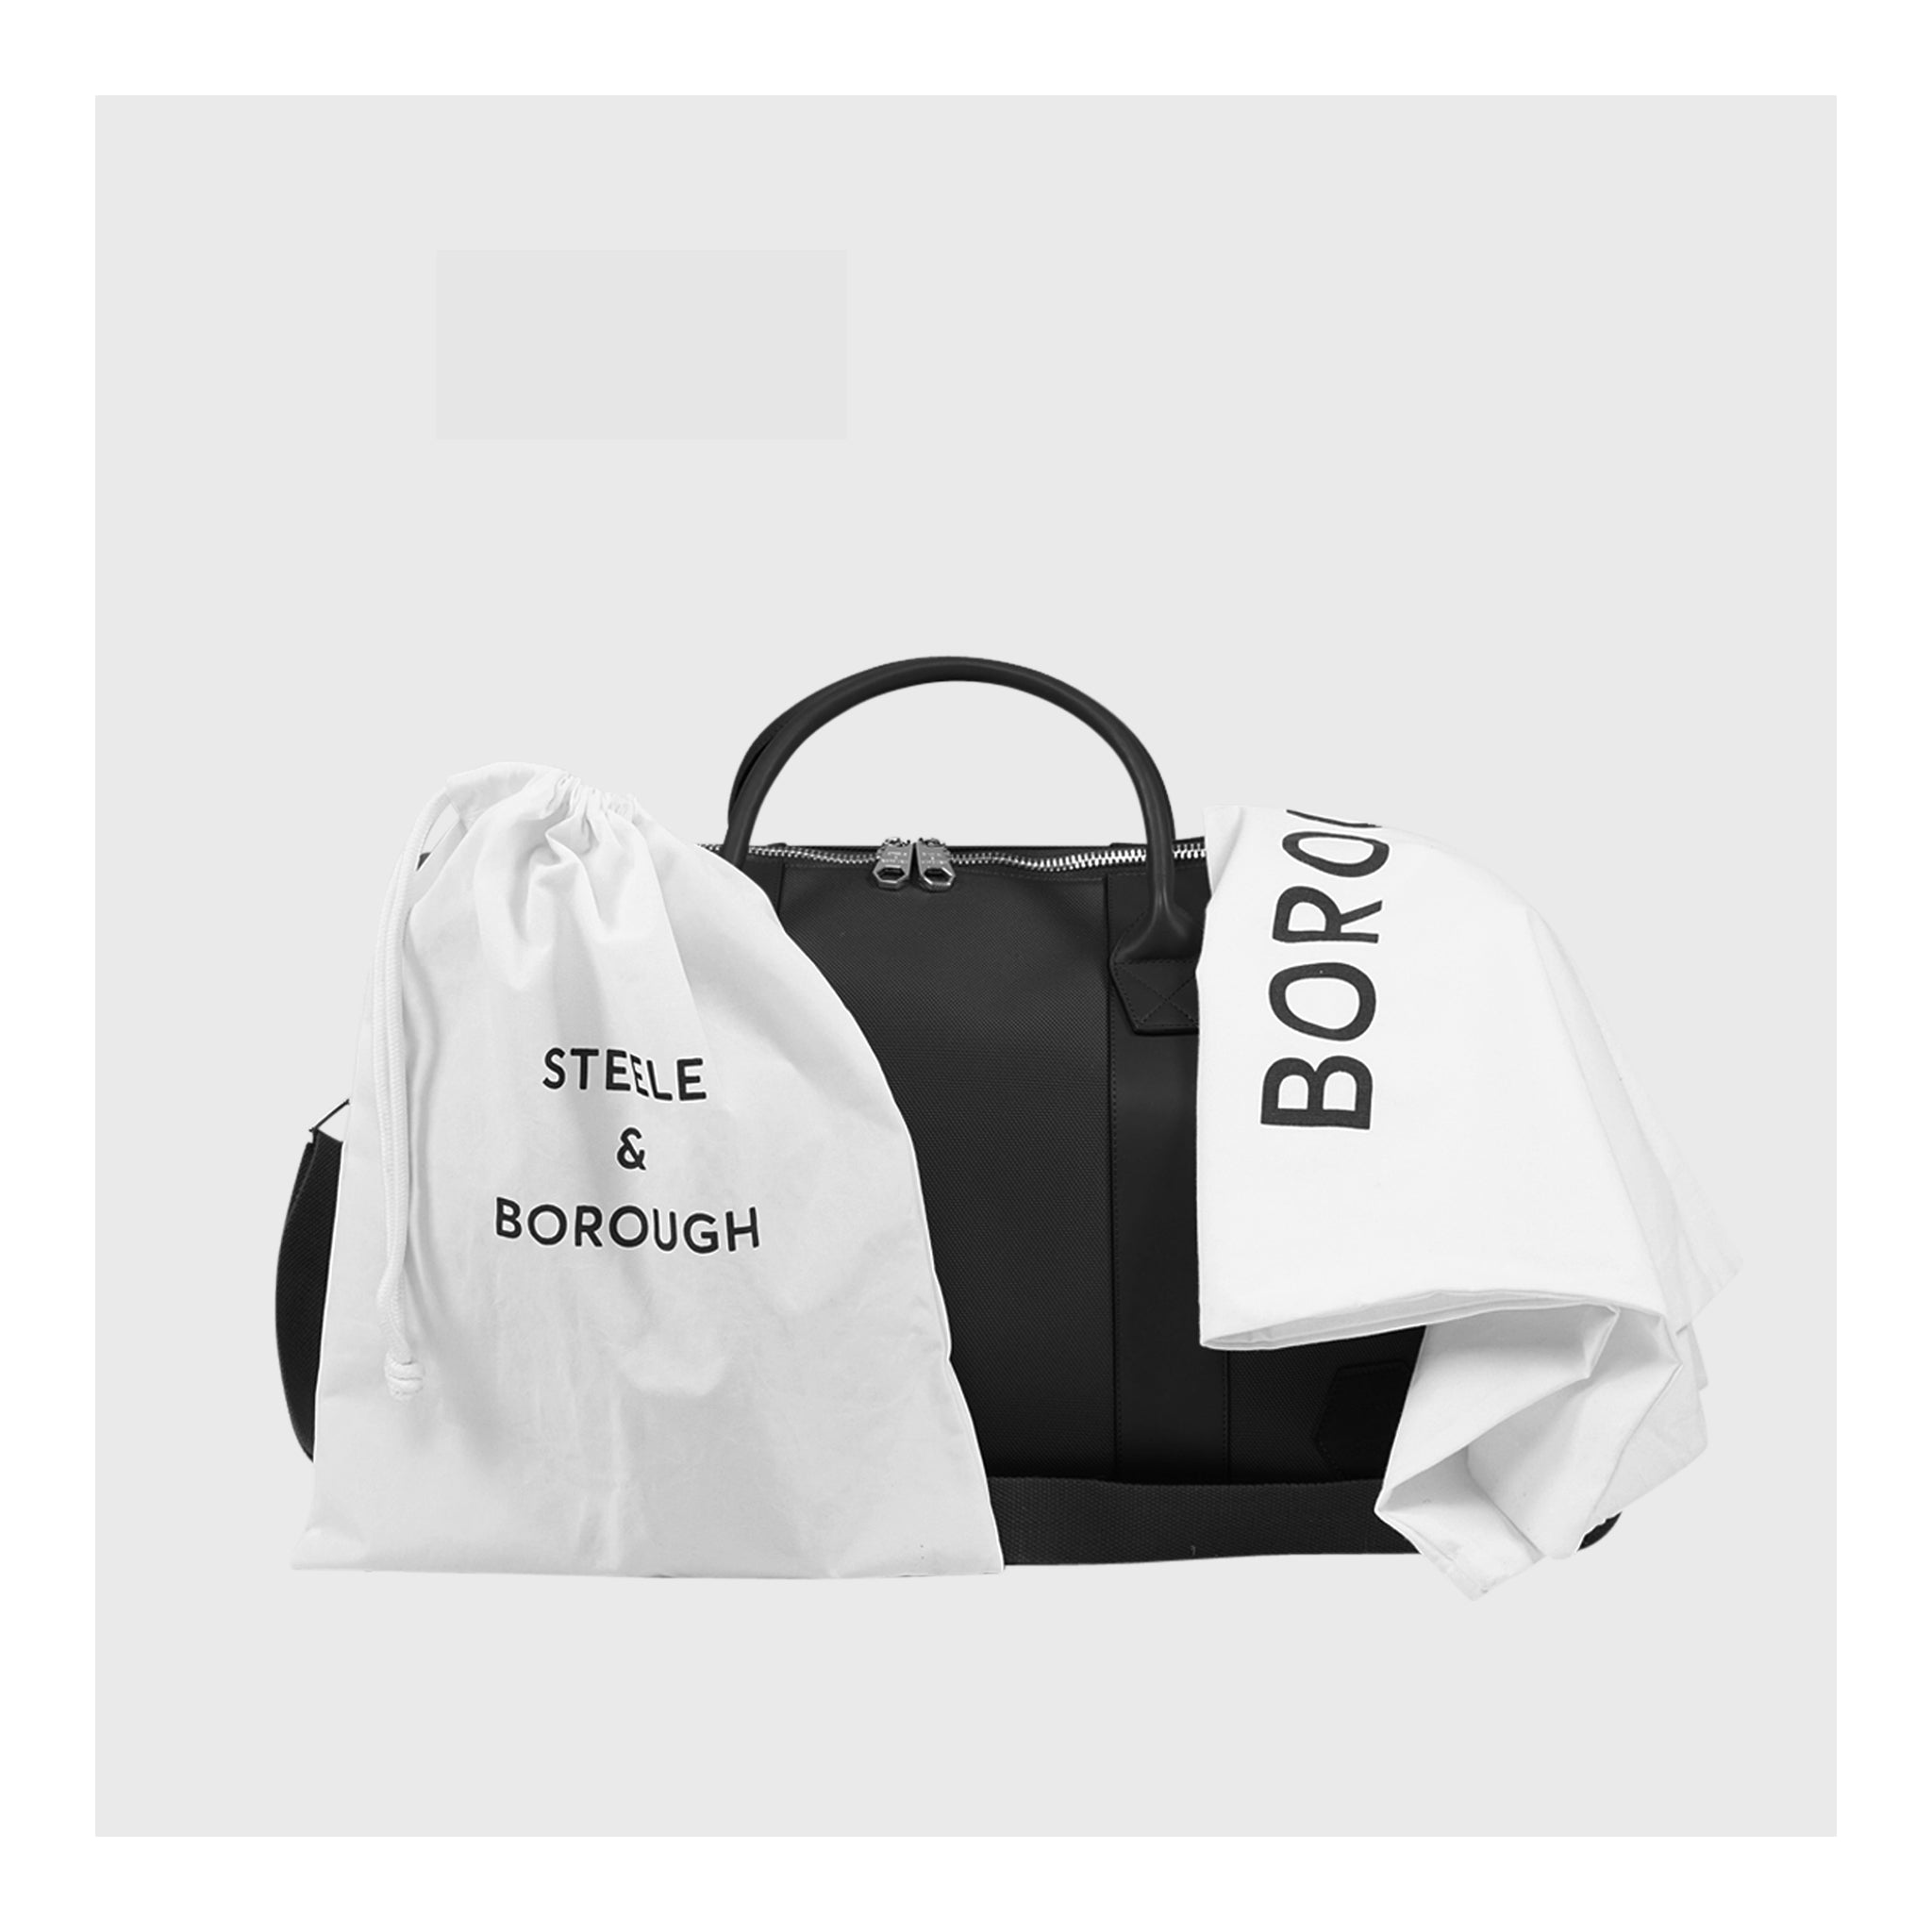 Black Weekend Bag paired with a protective white dust bag, merging luxury with practicality